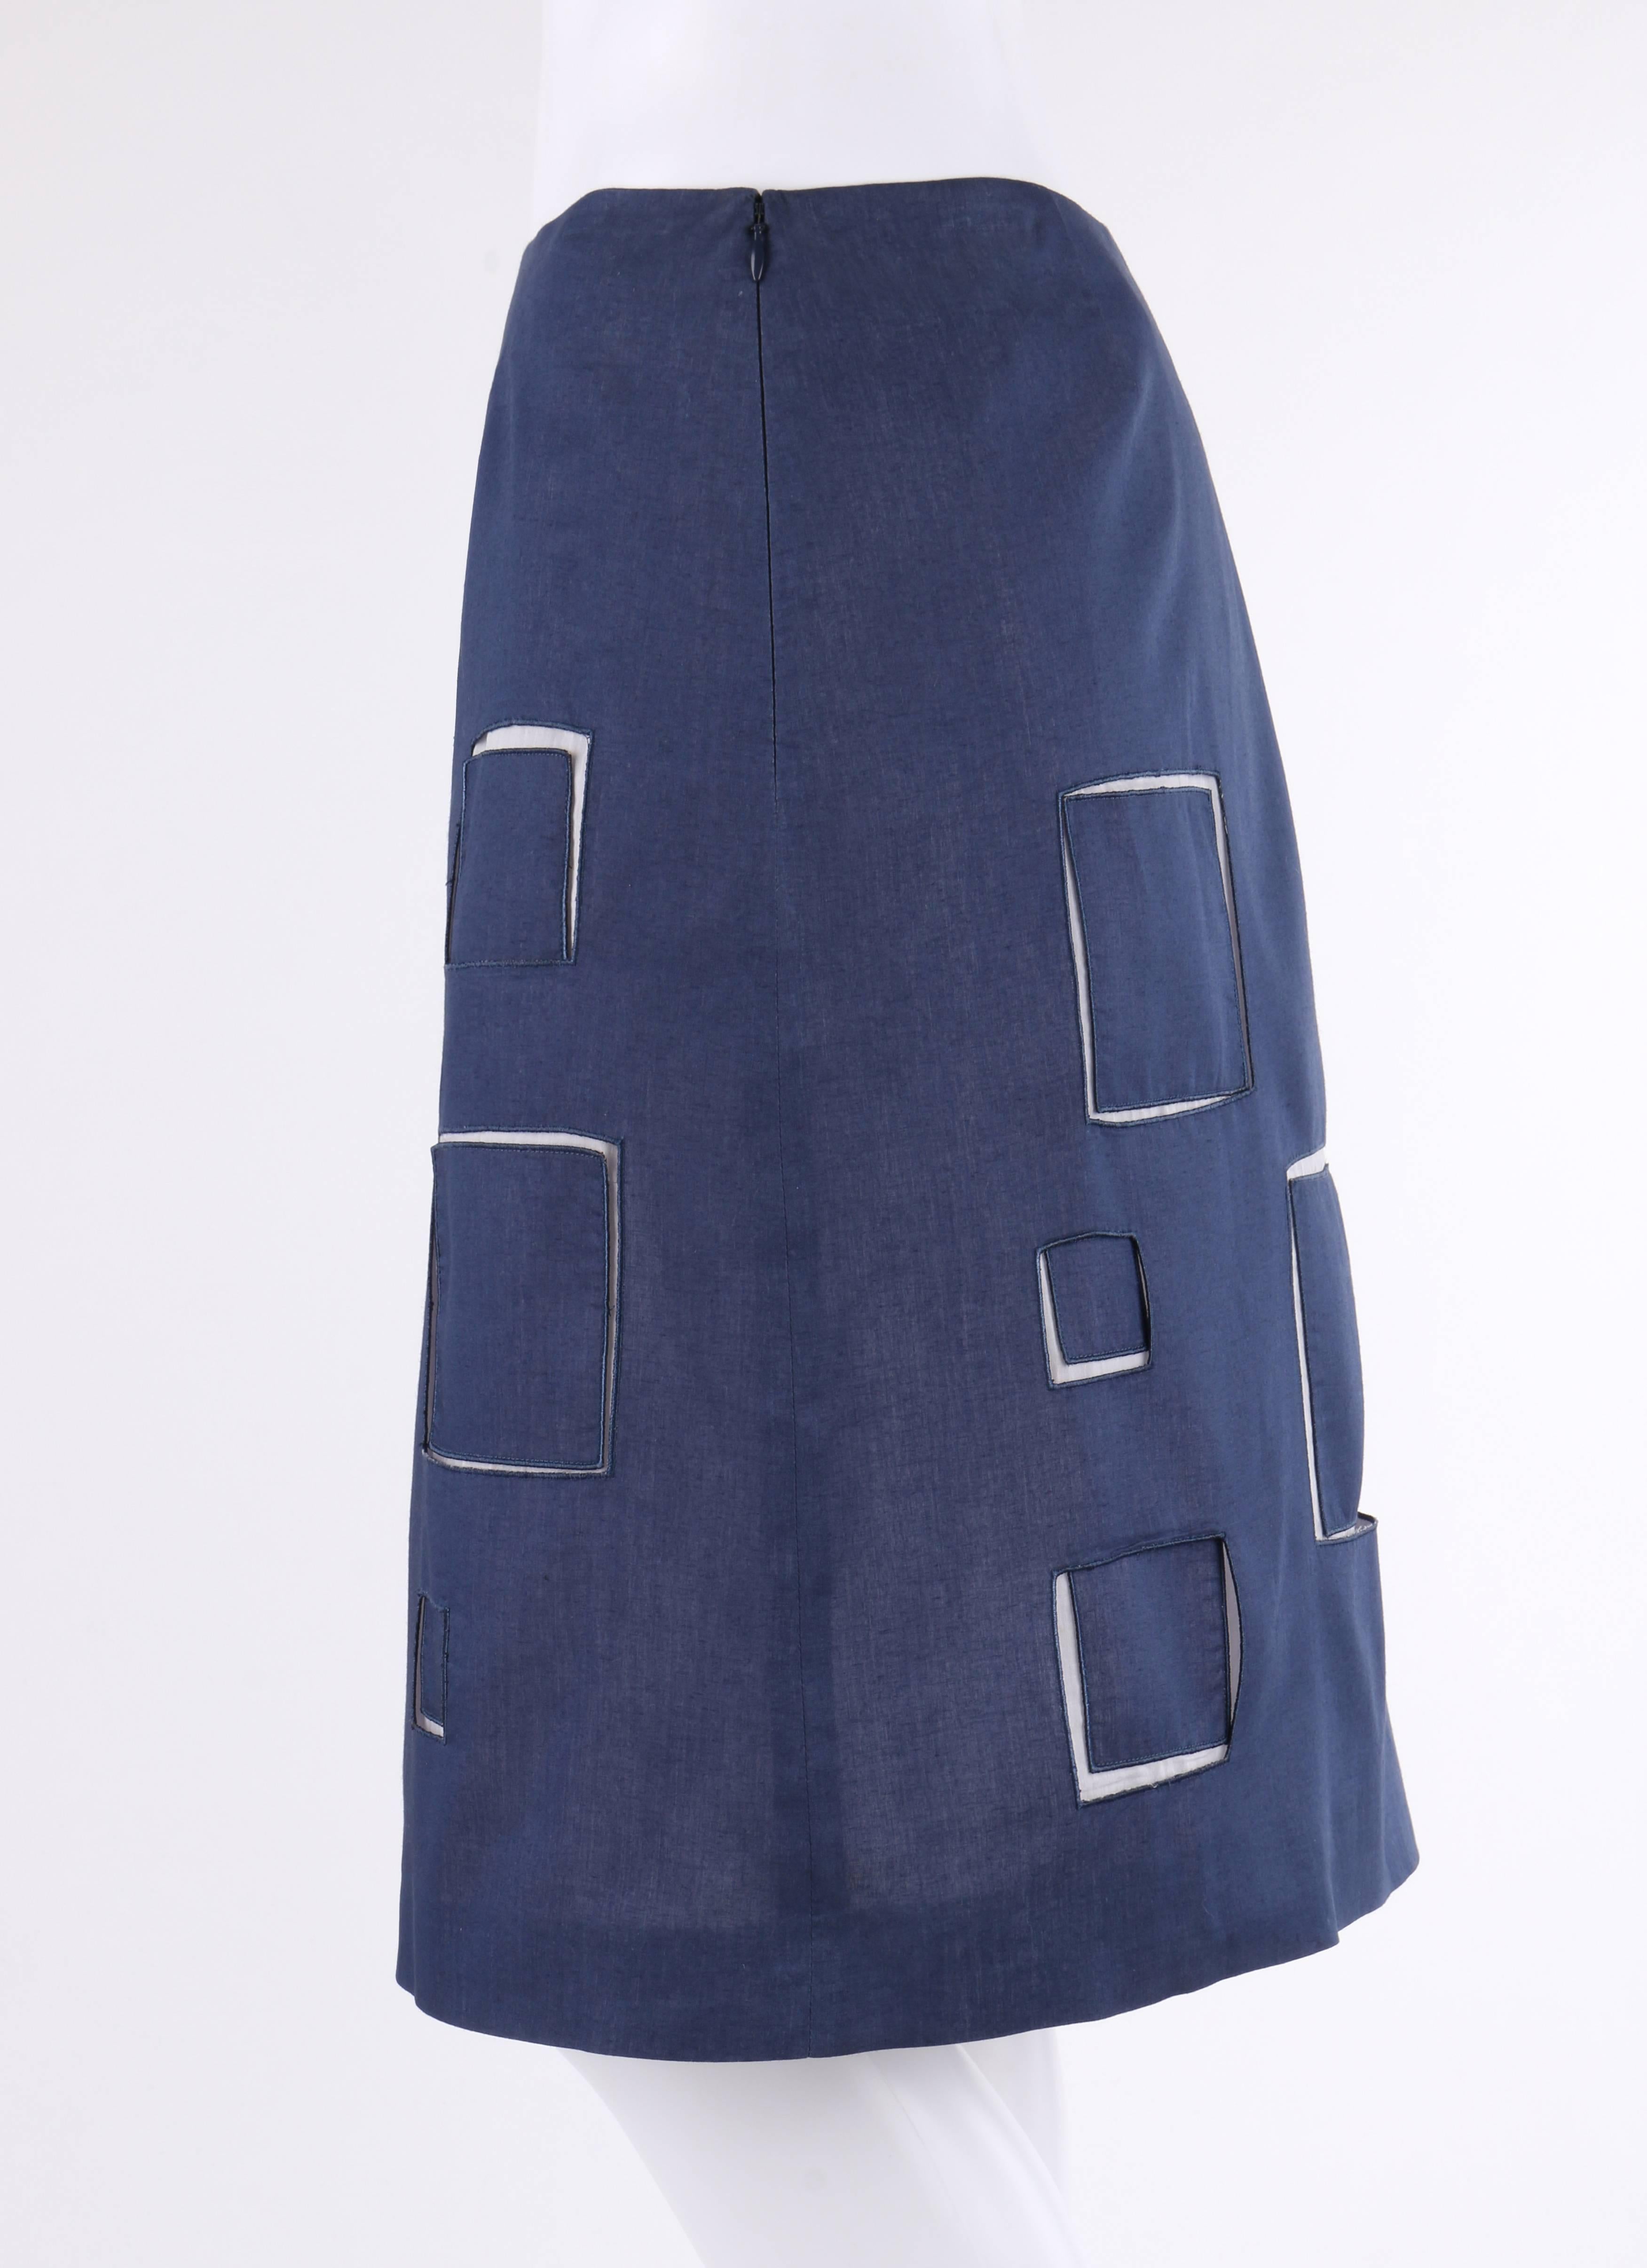 GIVENCHY Couture A/W 1998 ALEXANDER McQUEEN Blue Cotton Square Cut Work Skirt 1